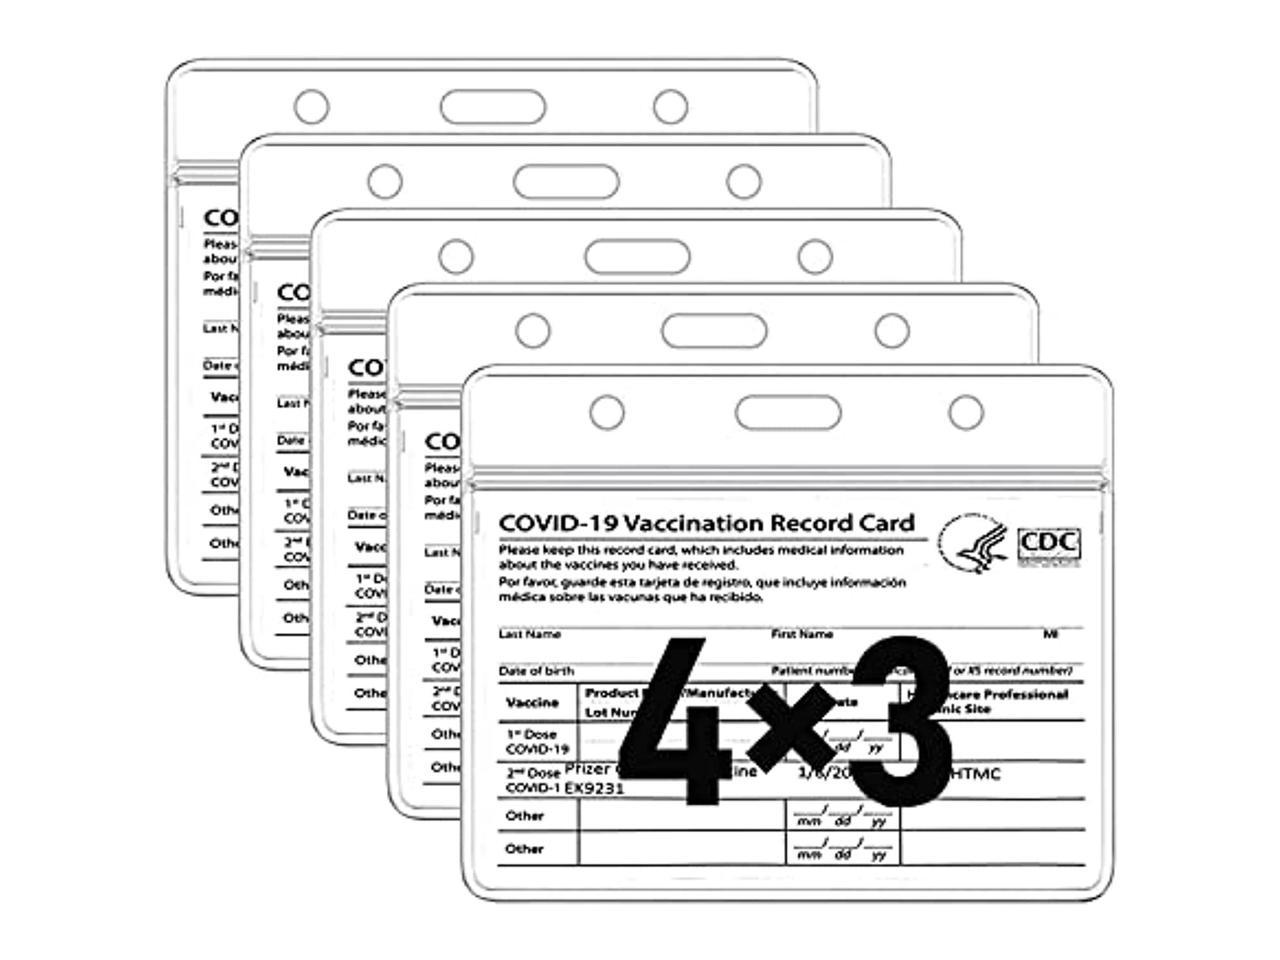 Covid Vaccine Card Holder 2PCS Vaccine Card Protector CDC Vaccine Card Holder 4.5 x 3.5 IN Upgraded Immunization Card Vaccination Card Protector Plastic Sleeve with Waterproof Type Resealable Zip 